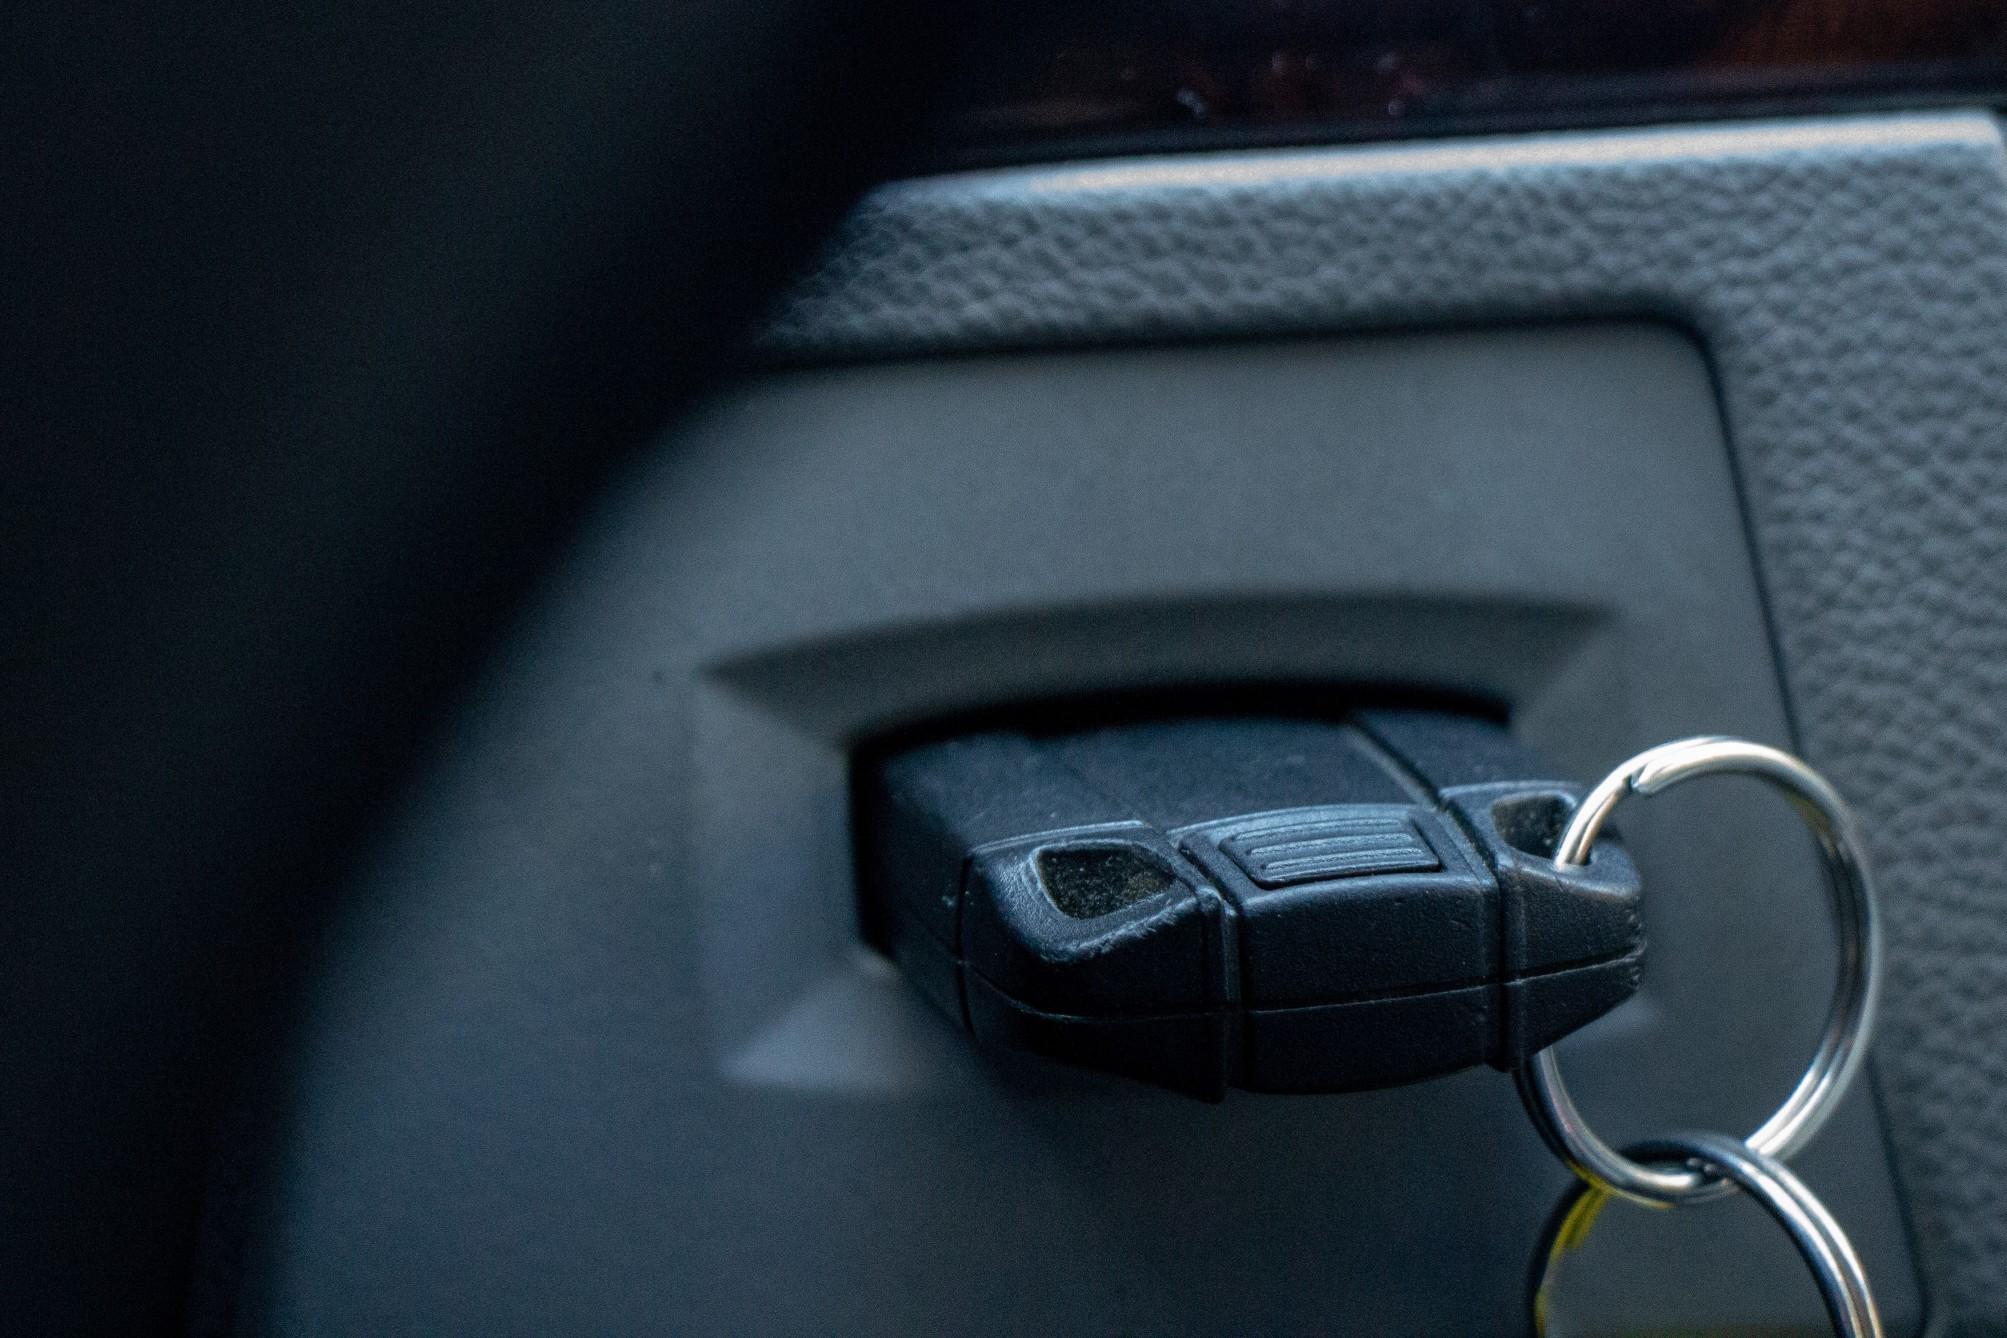 Thieves are using unknown technology to break into cars.